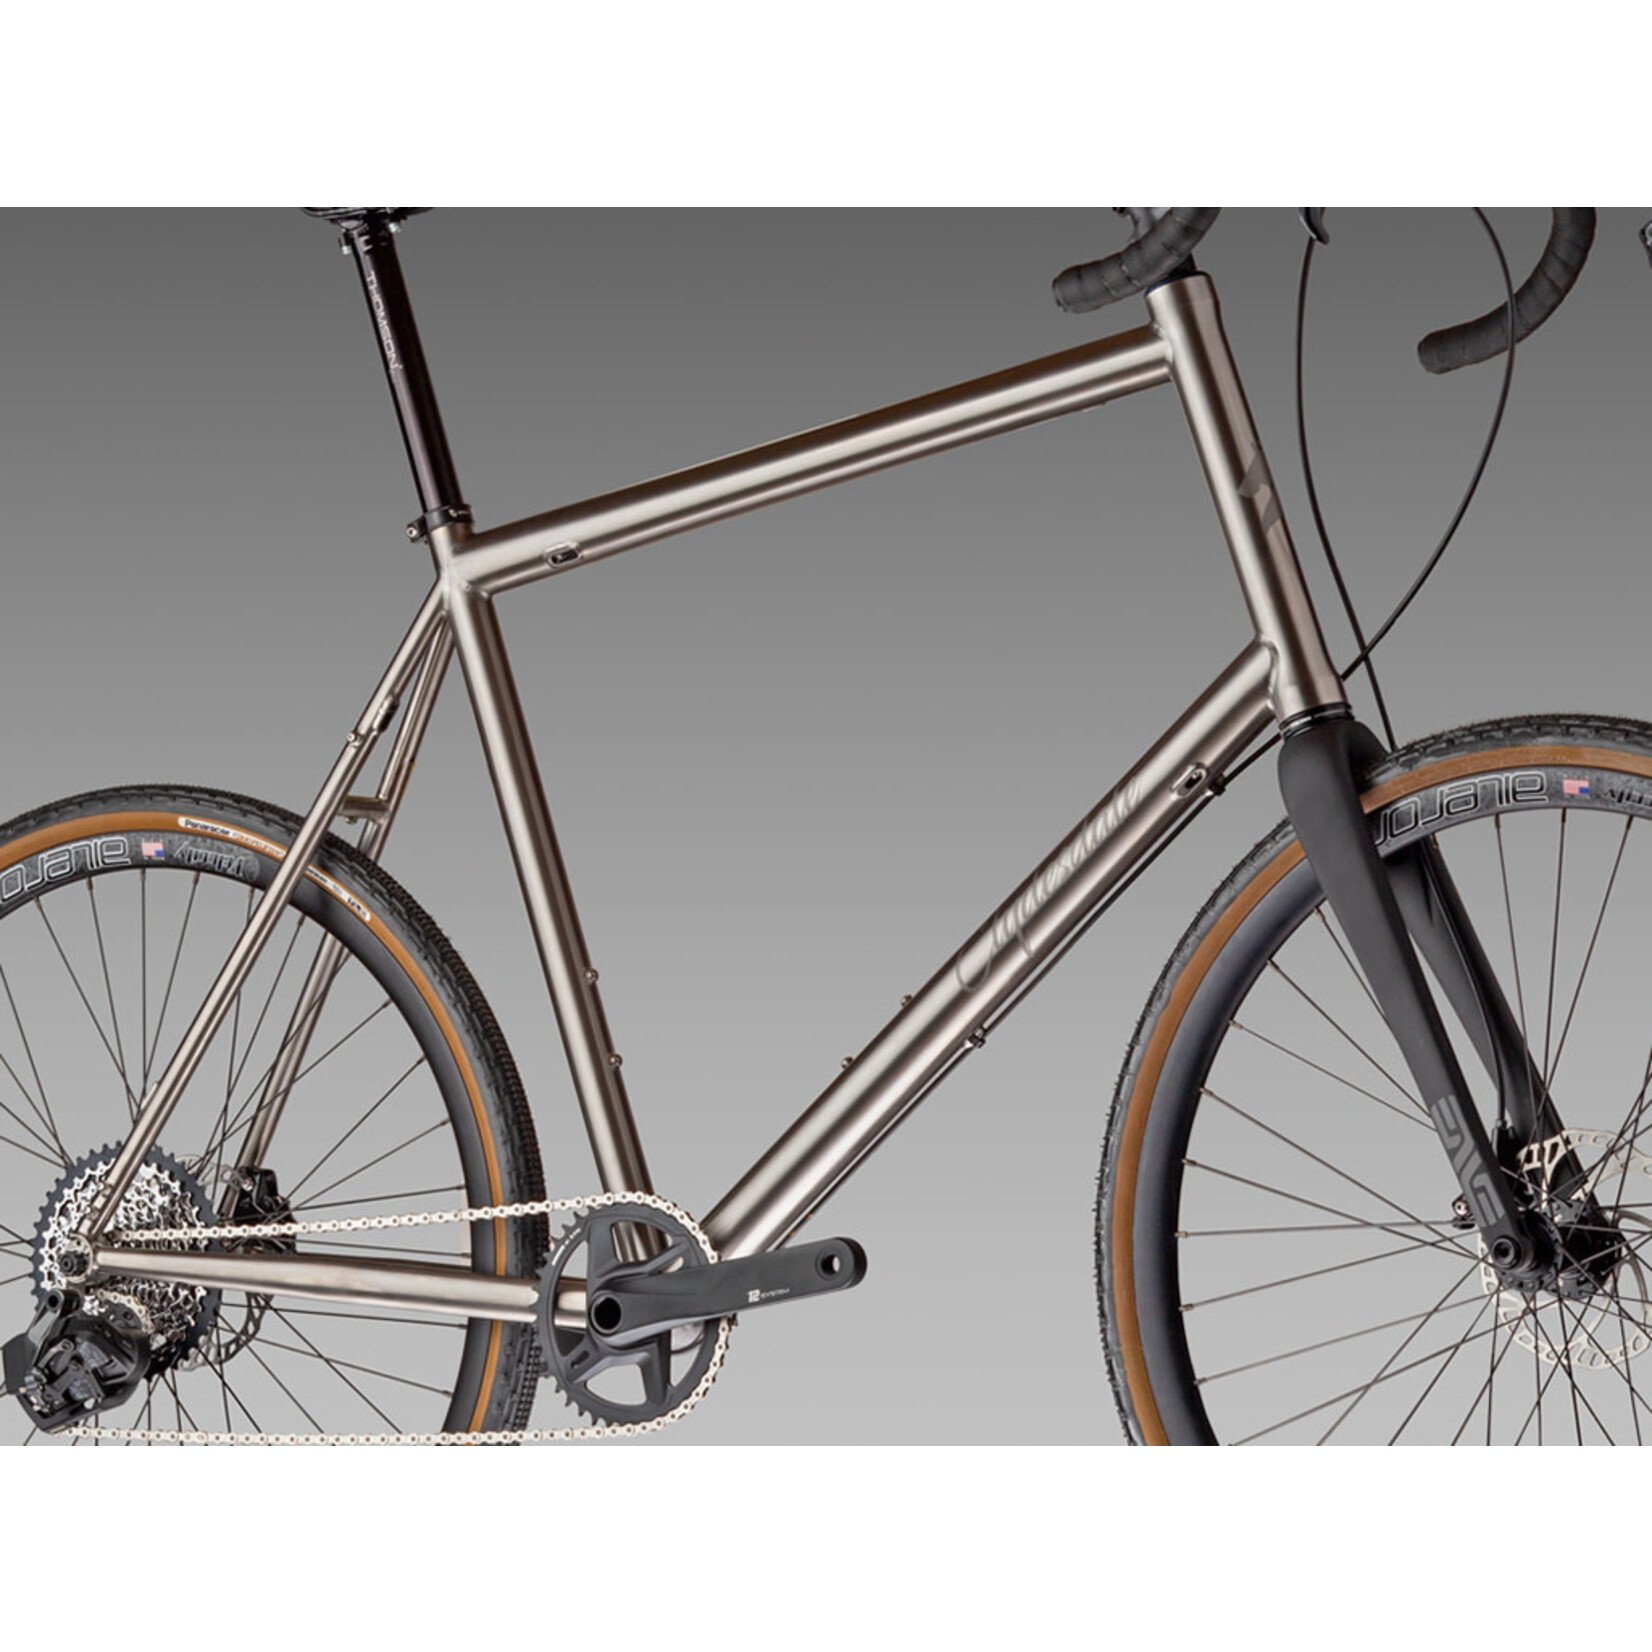 Clydesdale Clydesdale Team - Titanium gravel/road/touring bike - electronic shifting